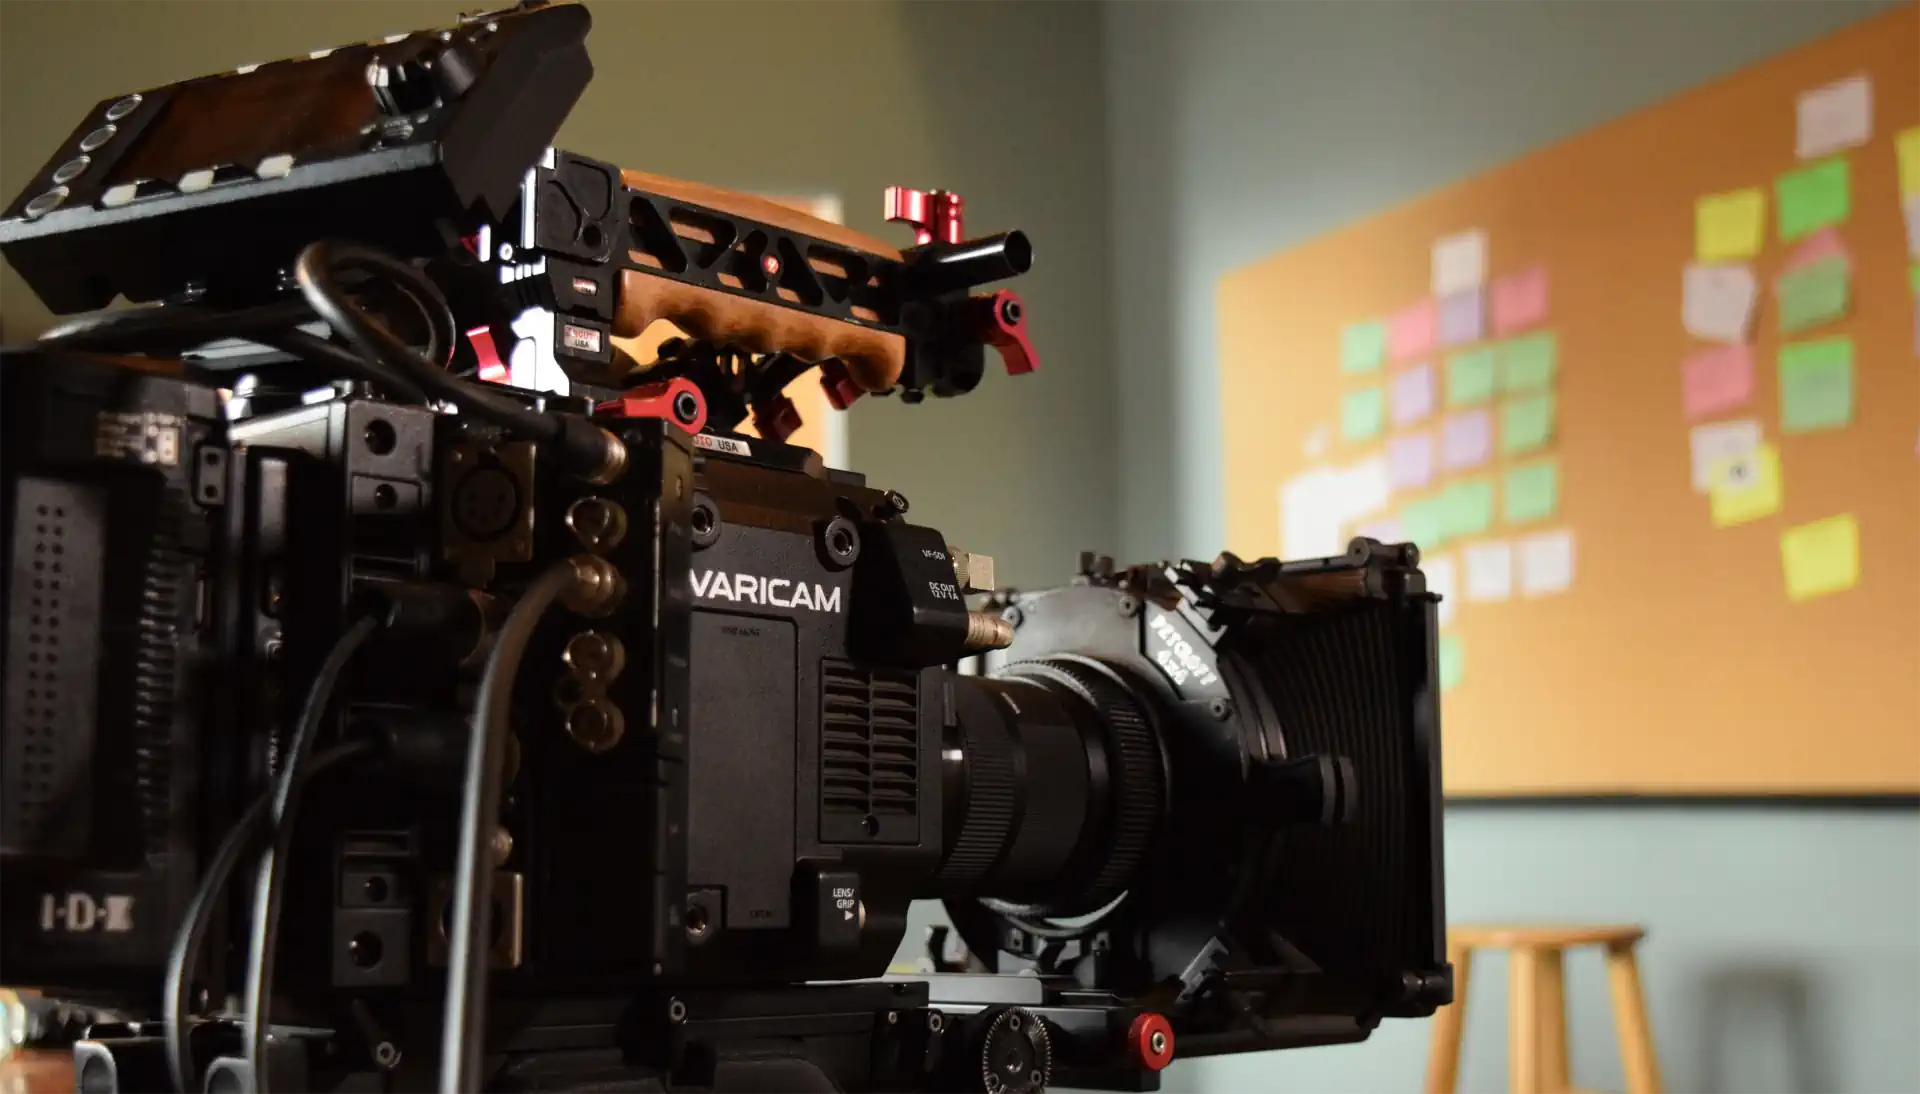 Our kansas city production agency showss off our Cinematic Camera: the Panasonic Varicam LT.